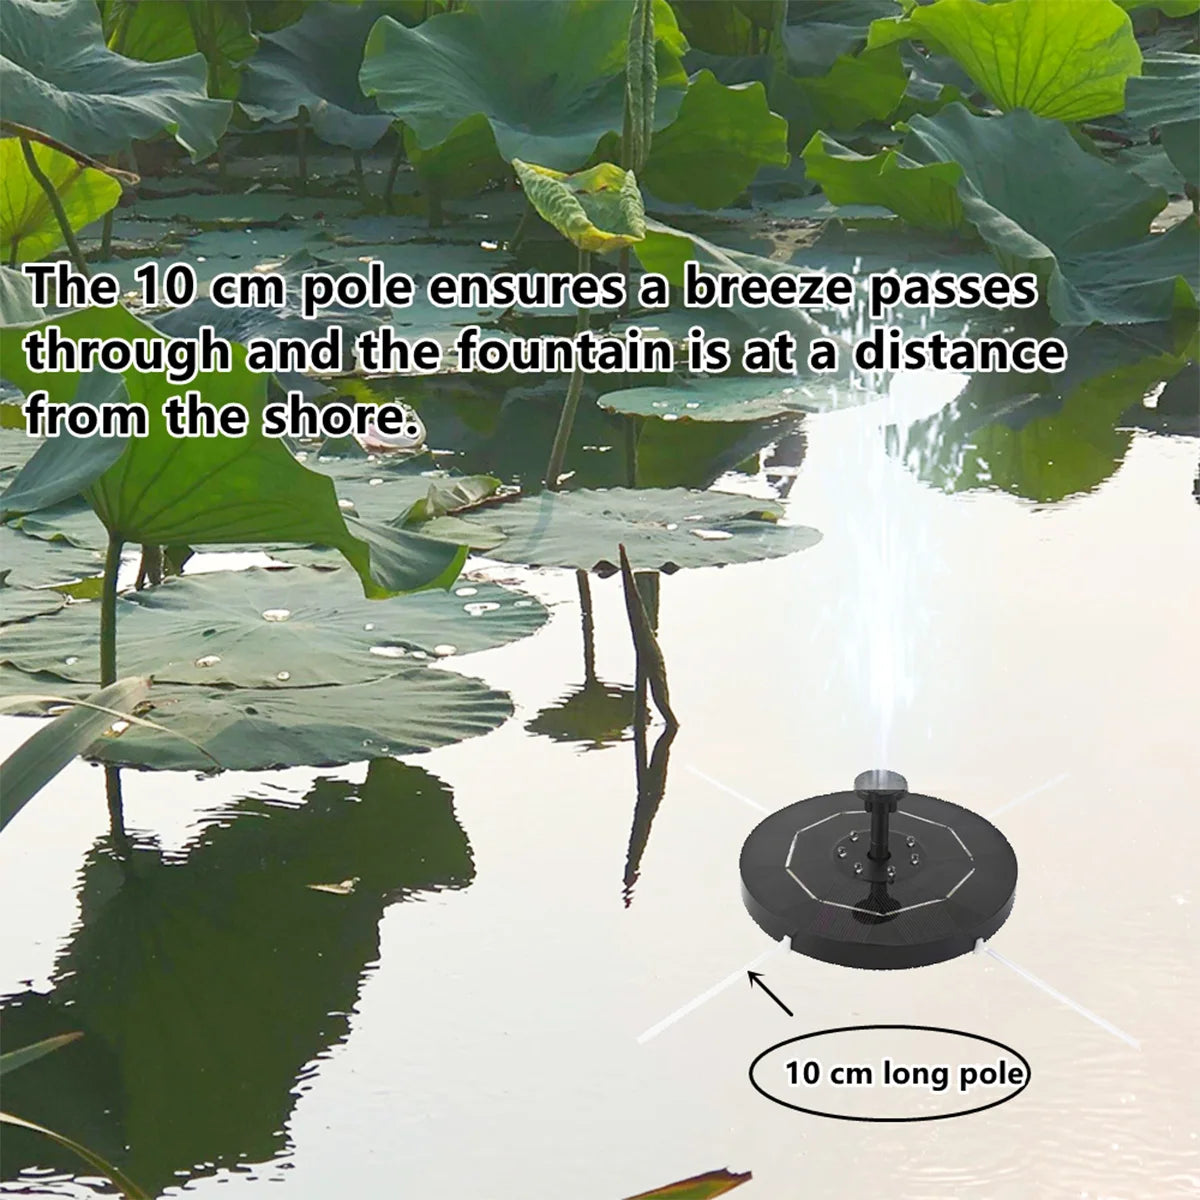 16cm Round Solar Fountain, Anti-dry burn function shuts off pump when water level drops below 3cm to prevent damage.